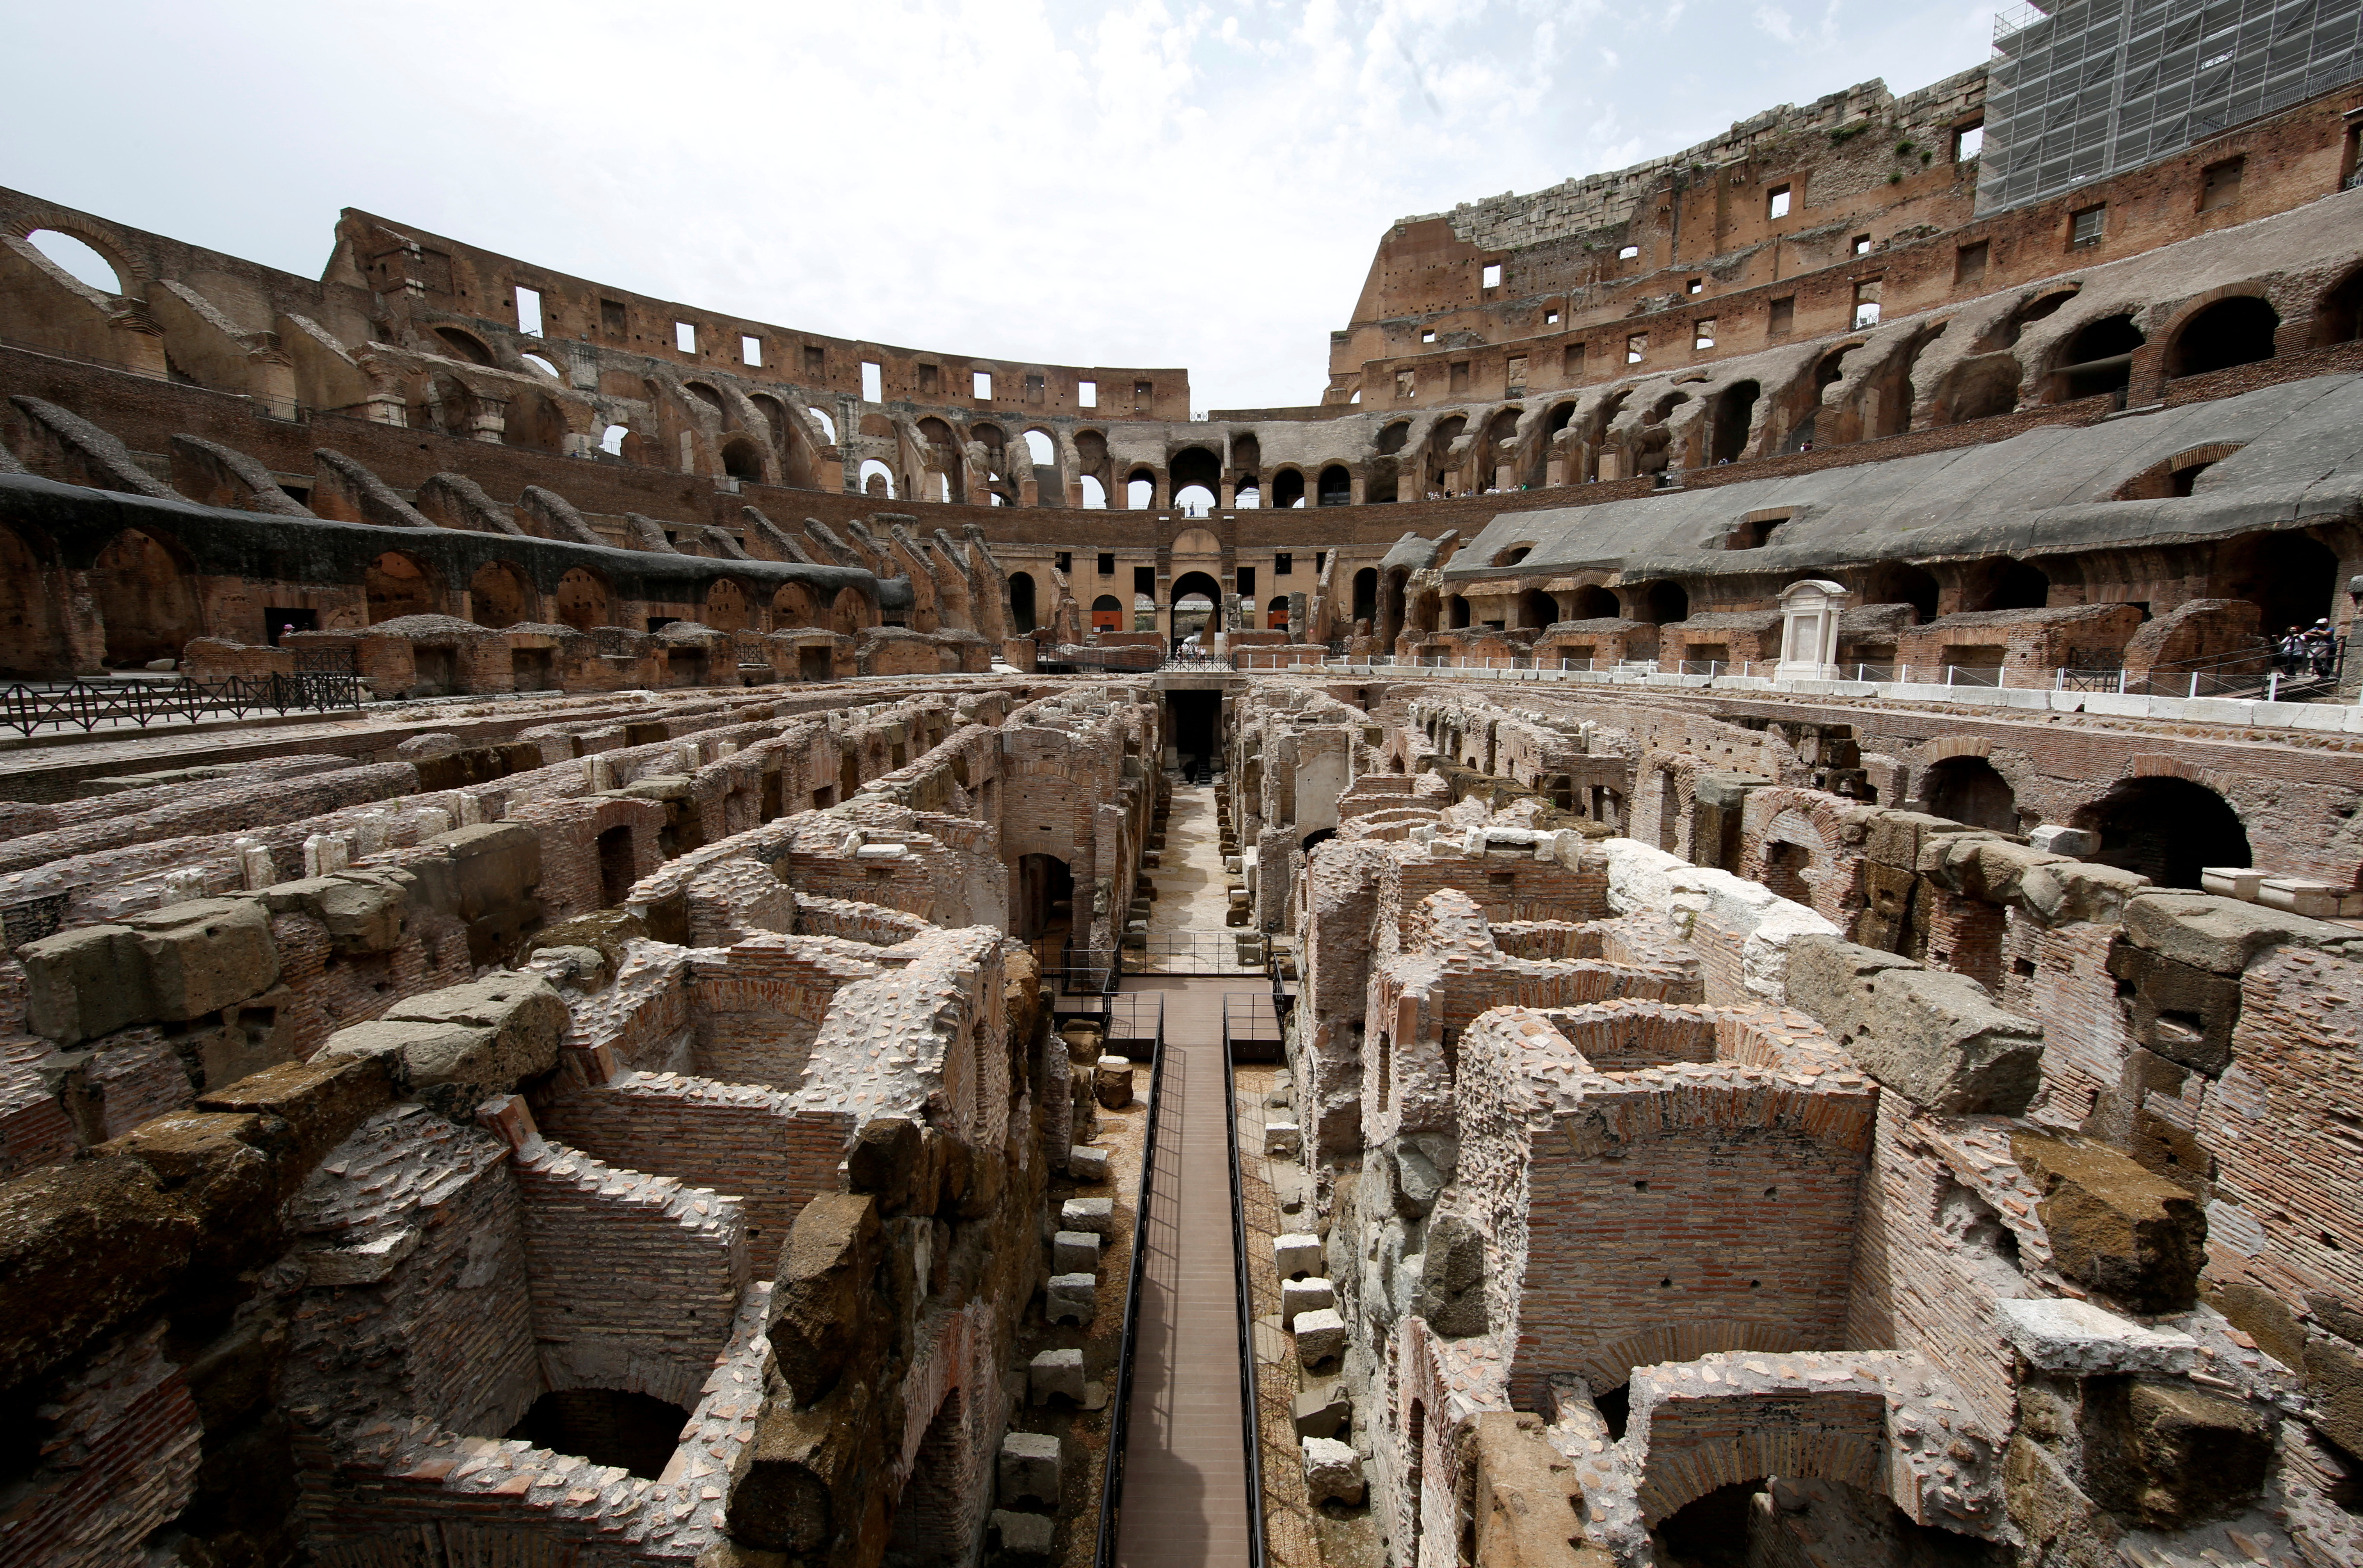 View of Colosseum after restoration project in Rome